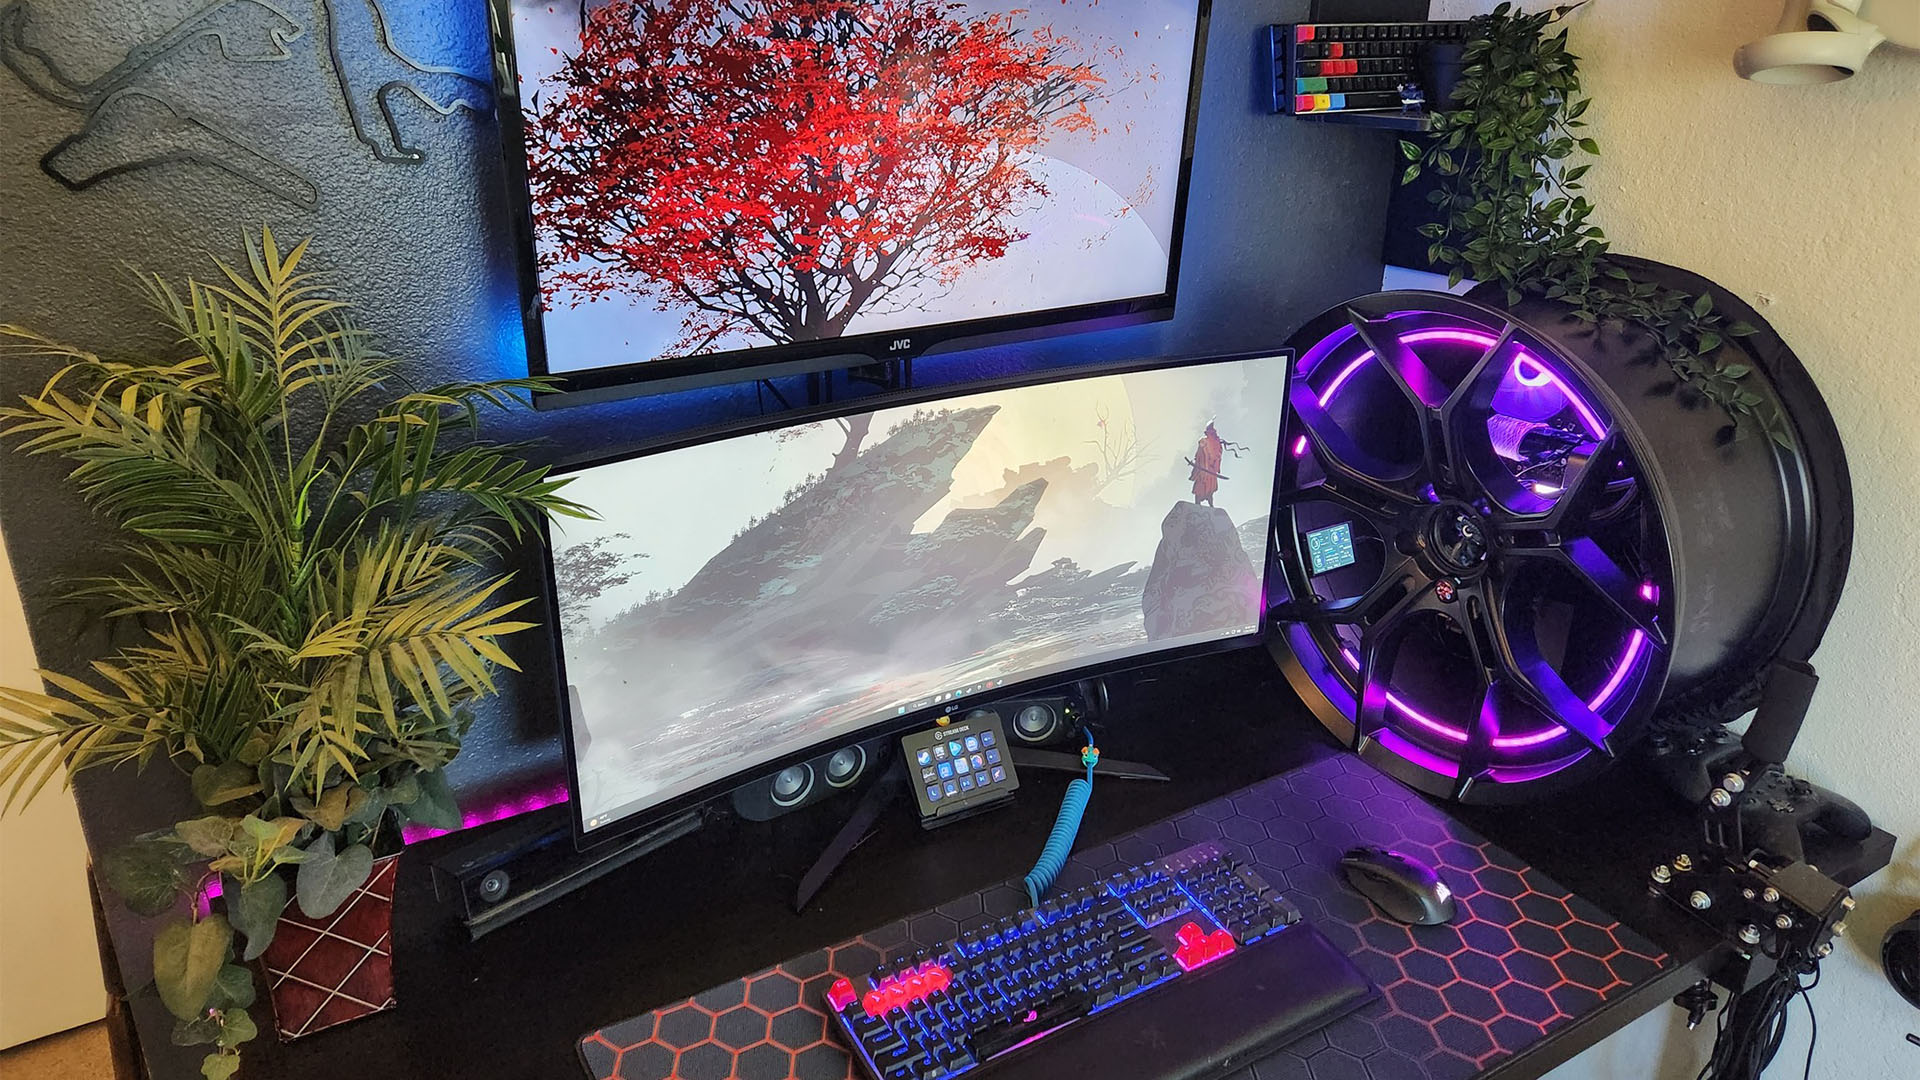 The gaming PC inside a car wheel and illuminated with purple RGB